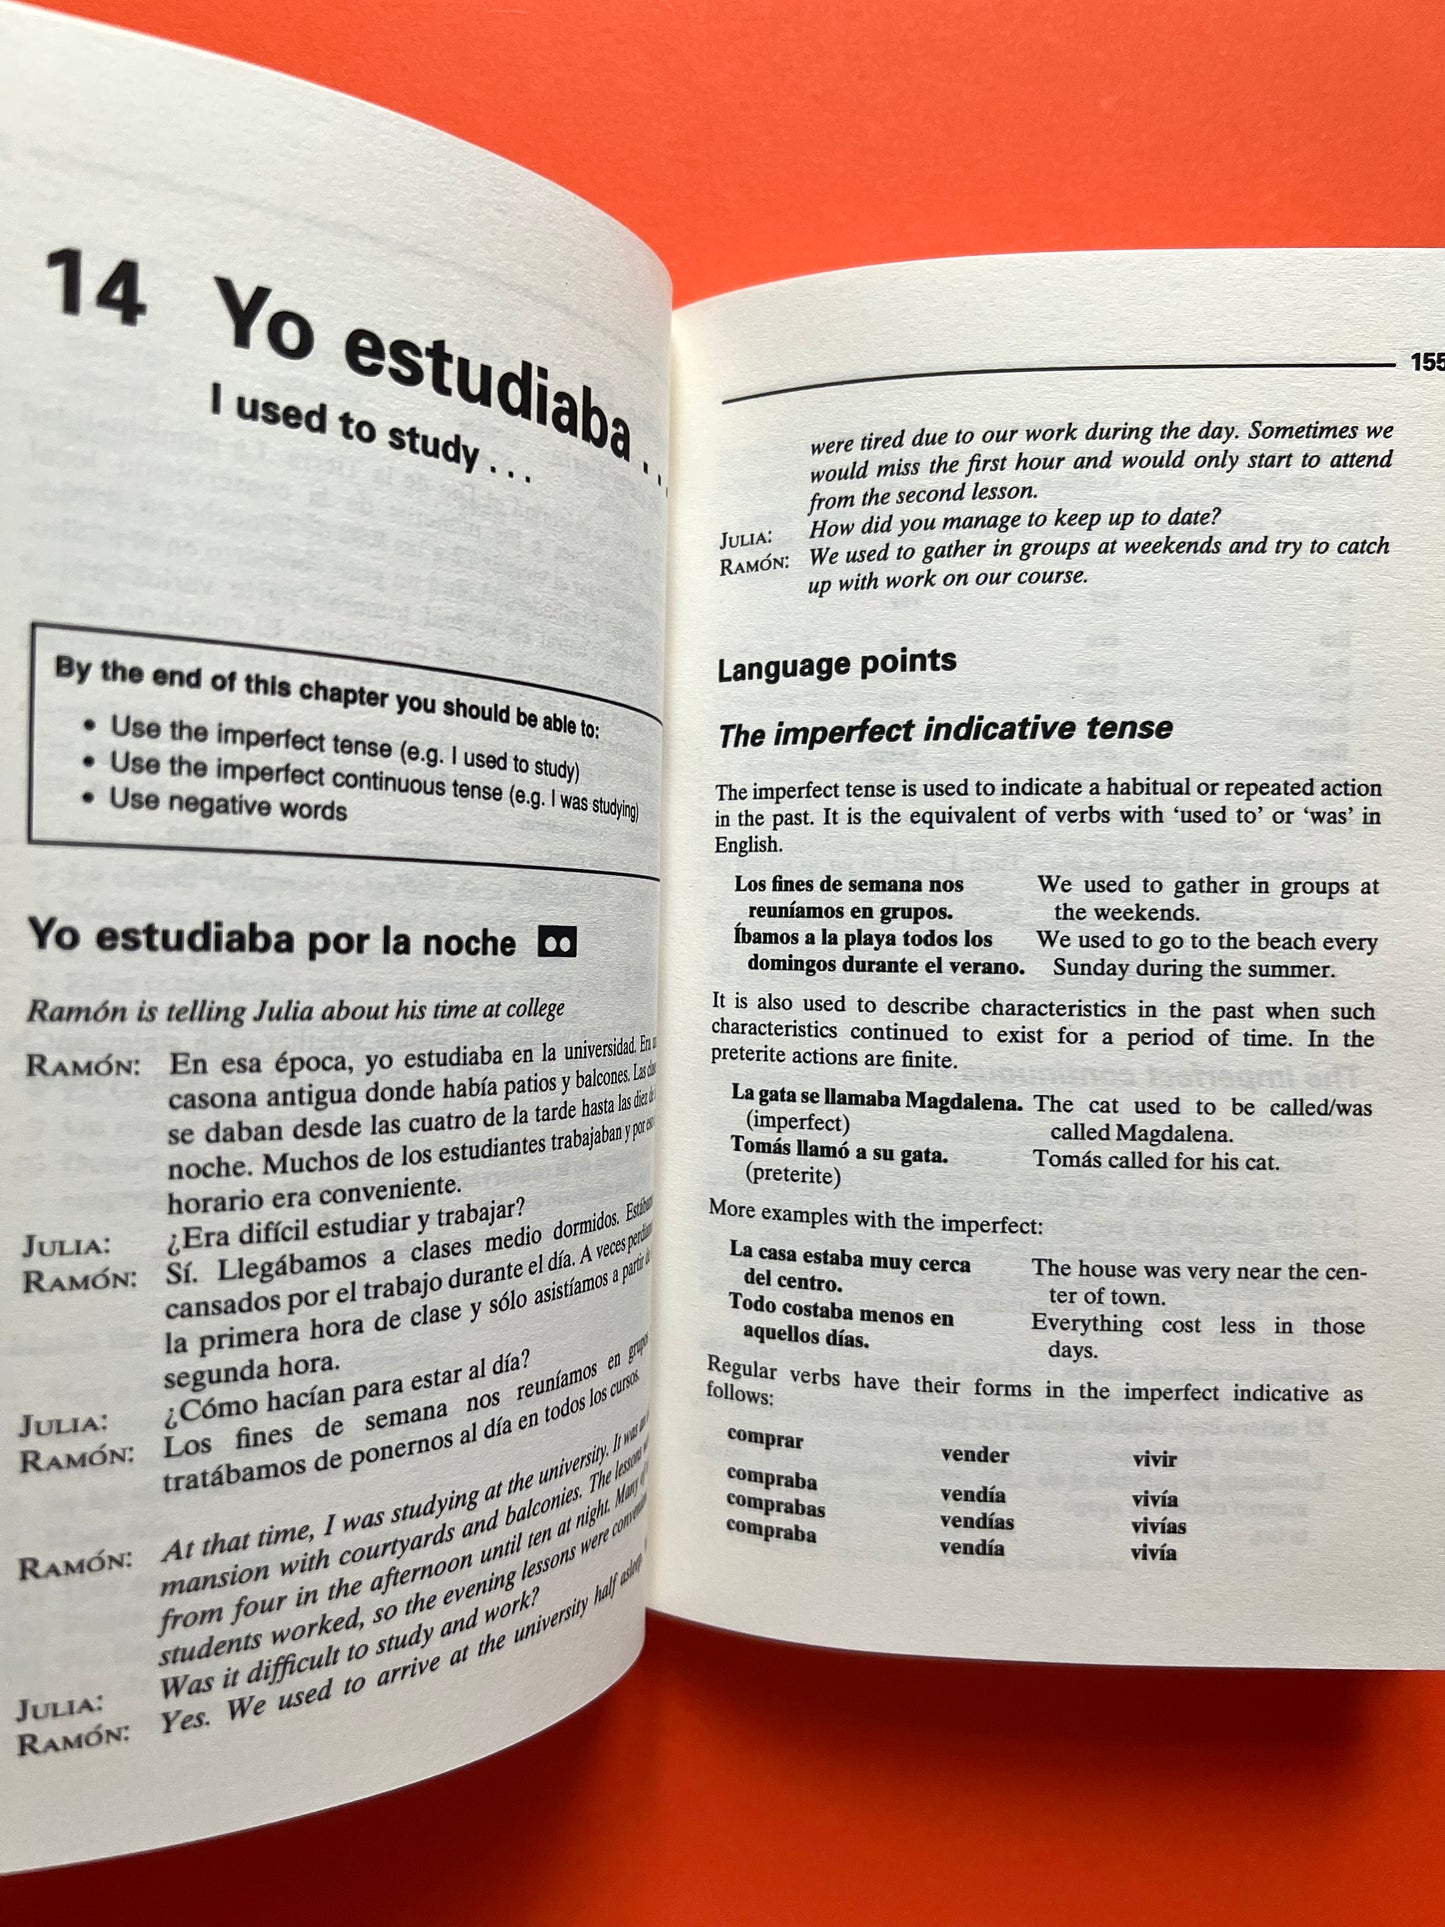 Colloquial Spanish of Latin American A Complete Language Course